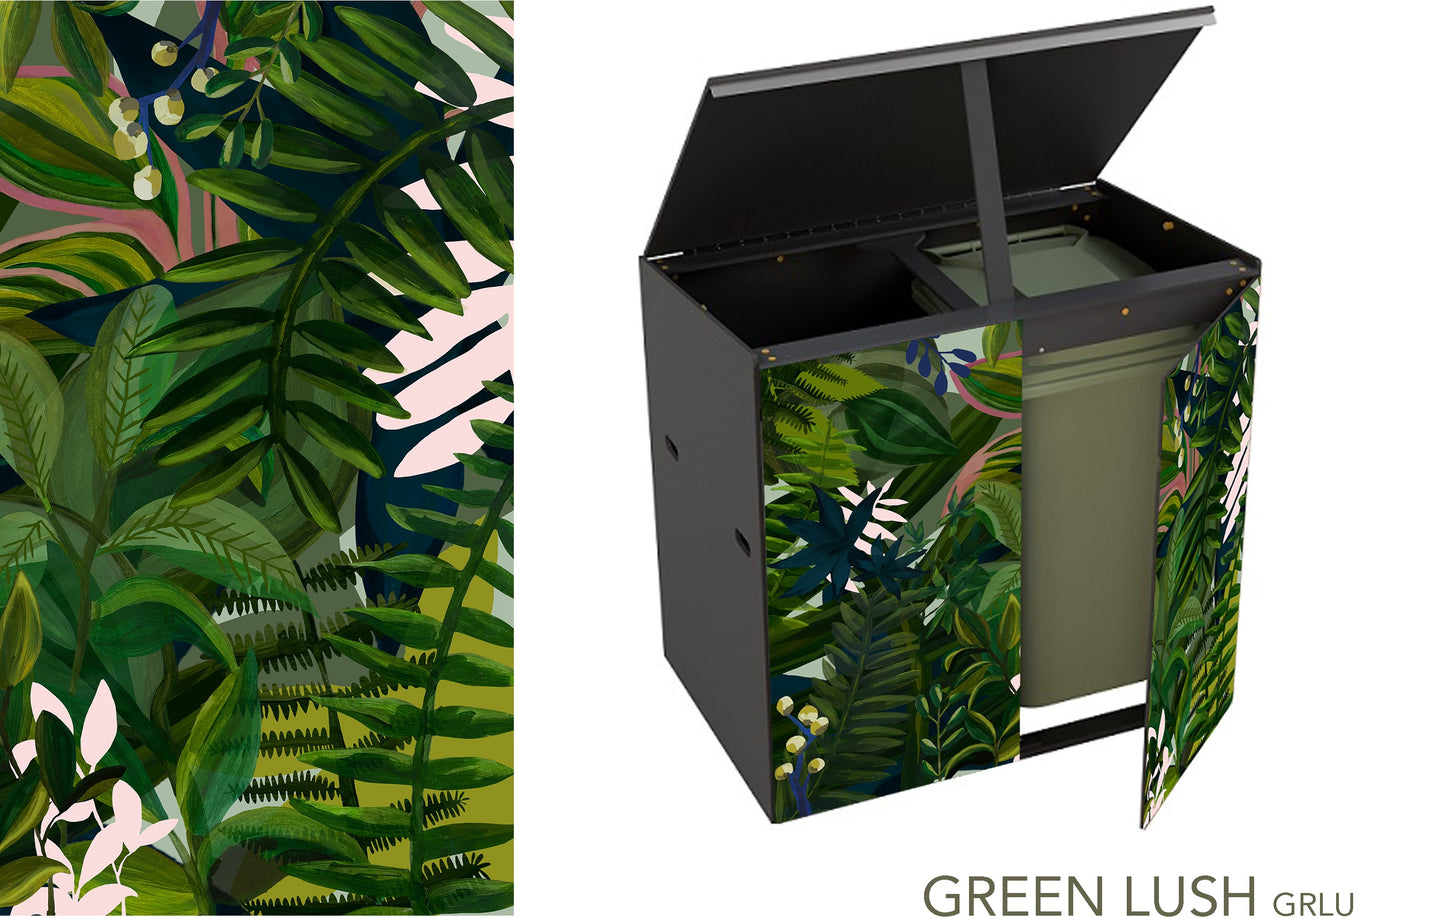 The 2 bin store with jungle vibe featuring vibrant green foliage as previous description but this time the unit lid is propped open and a door is ajar revealing a green wheelie-bin inside.